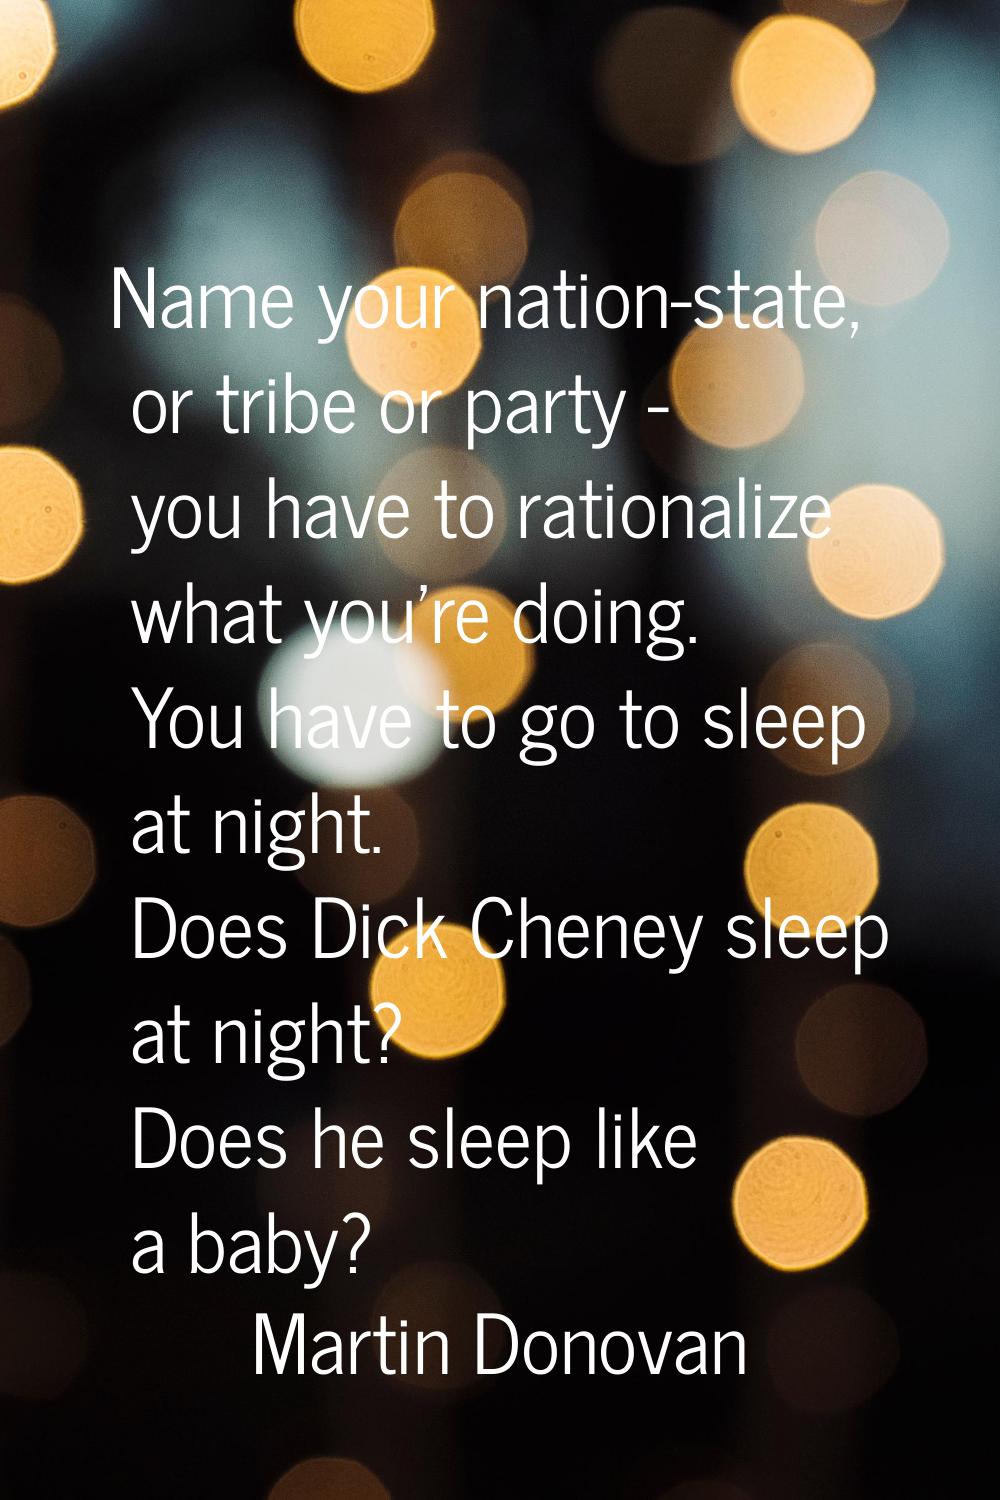 Name your nation-state, or tribe or party - you have to rationalize what you're doing. You have to 